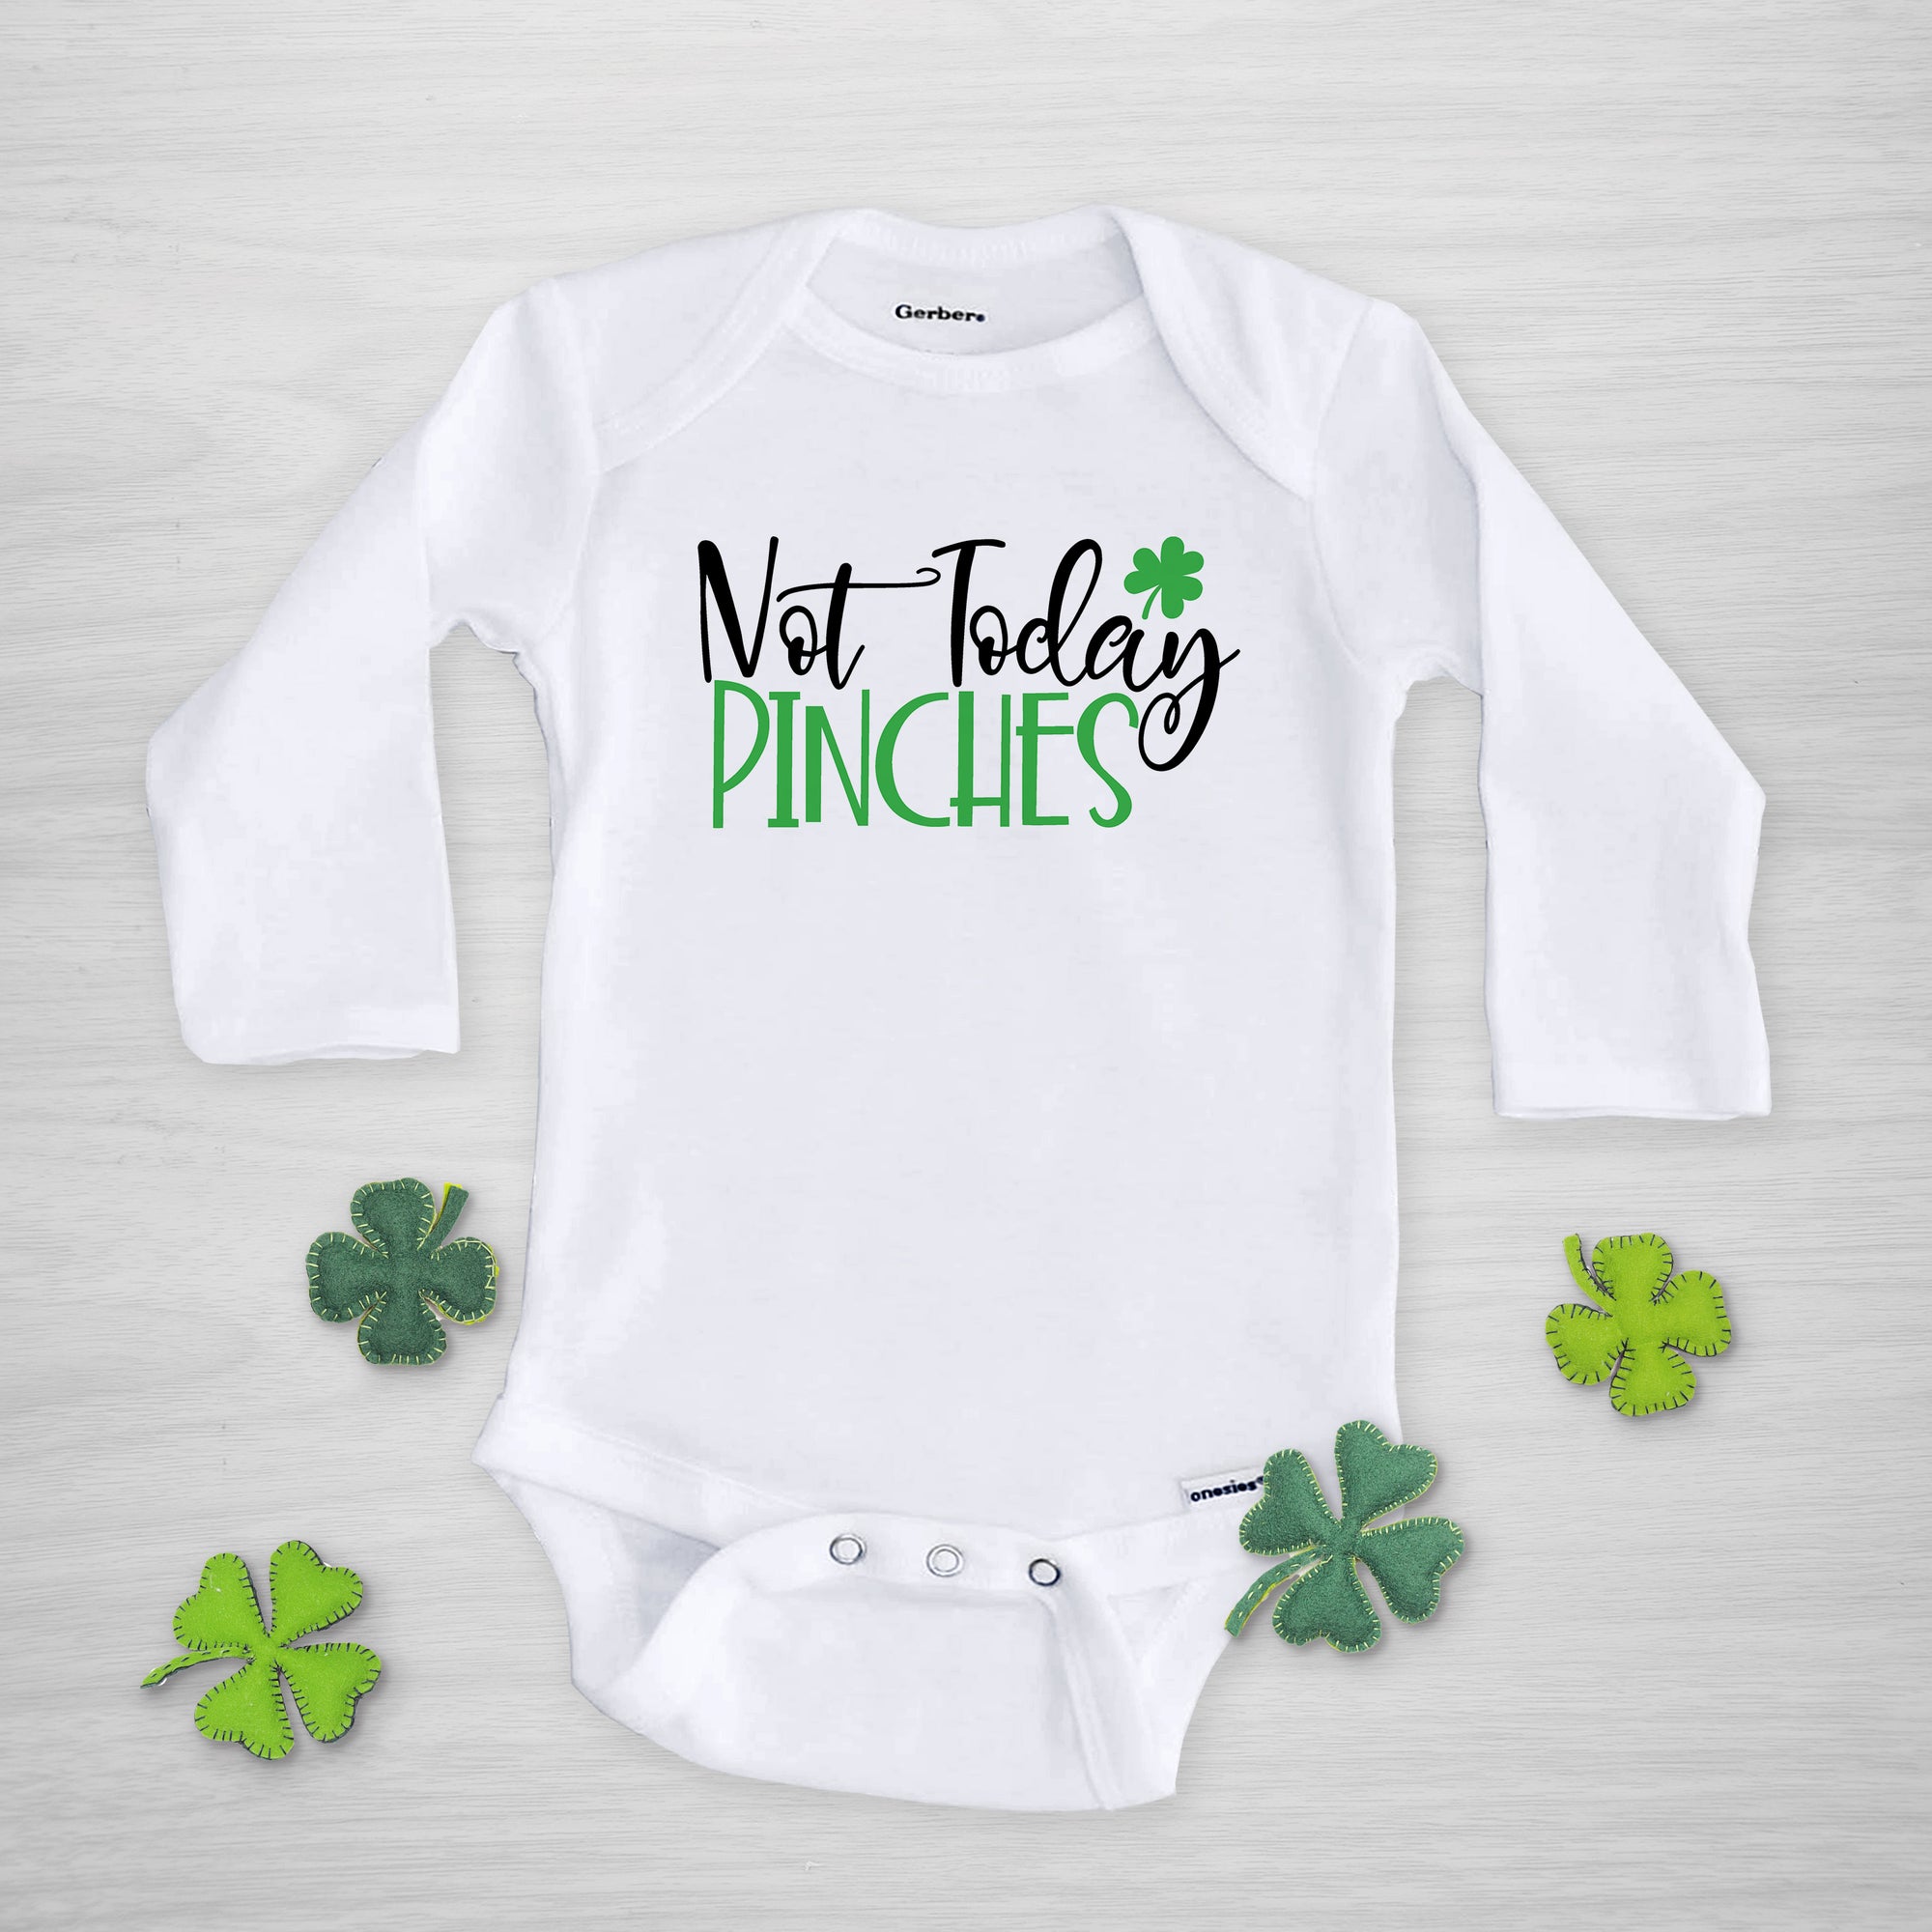 Not today pinches St Patrick's Day Gerber Onesie,  long sleeved